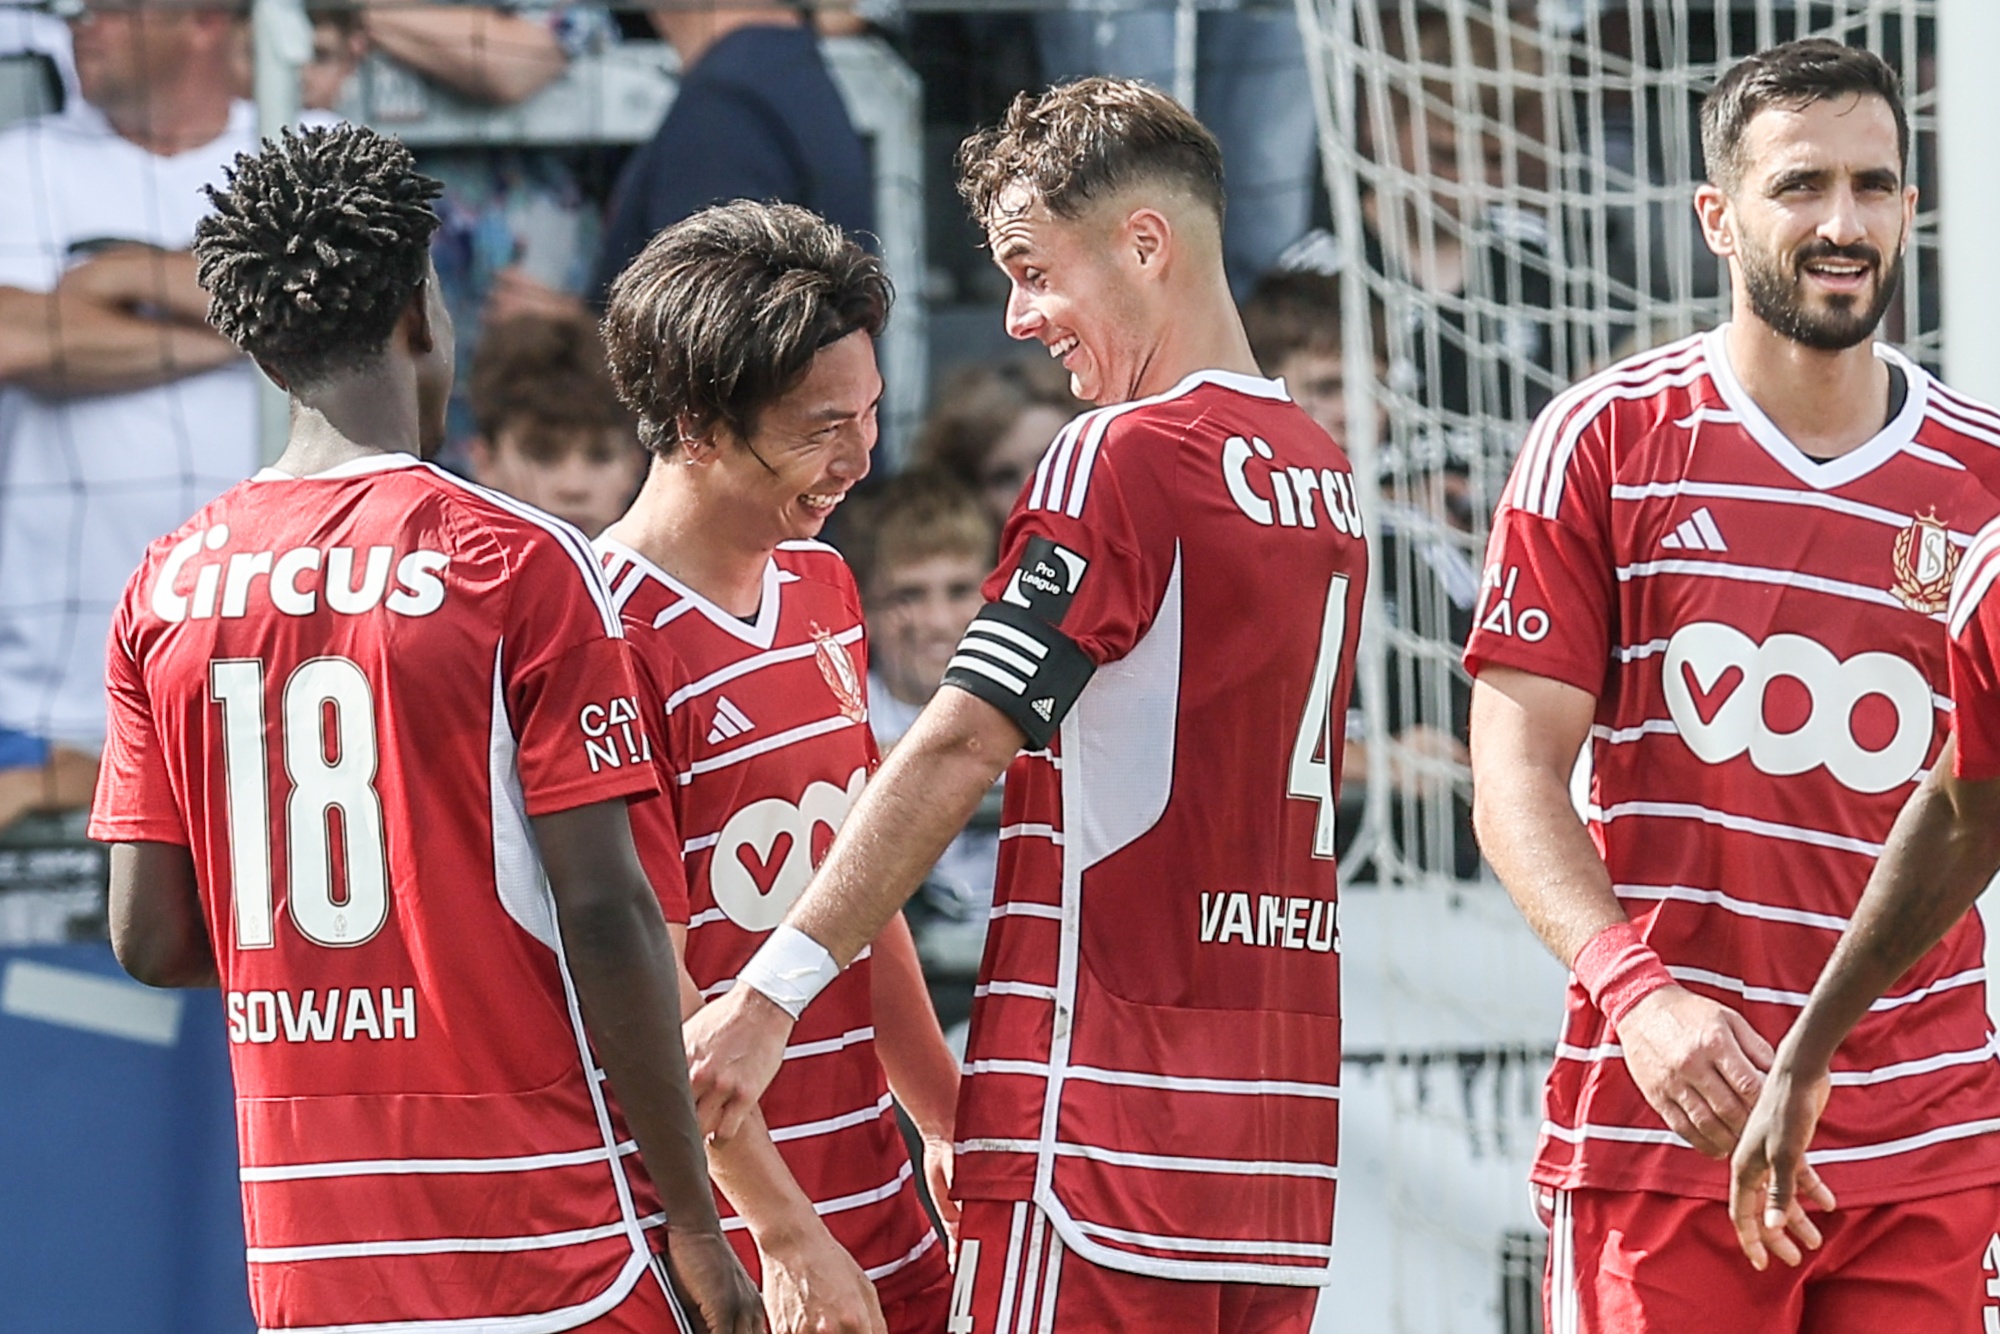 Standard's Hayao Kawabe celebrates after scoring during a soccer match between KAS Eupen and Standard de Liege, Sunday 17 September 2023 in Eupen, on day 07 of the 2023-2024 season of the 'Jupiler Pro League' first division of the Belgian championship. BELGA PHOTO BRUNO FAHY